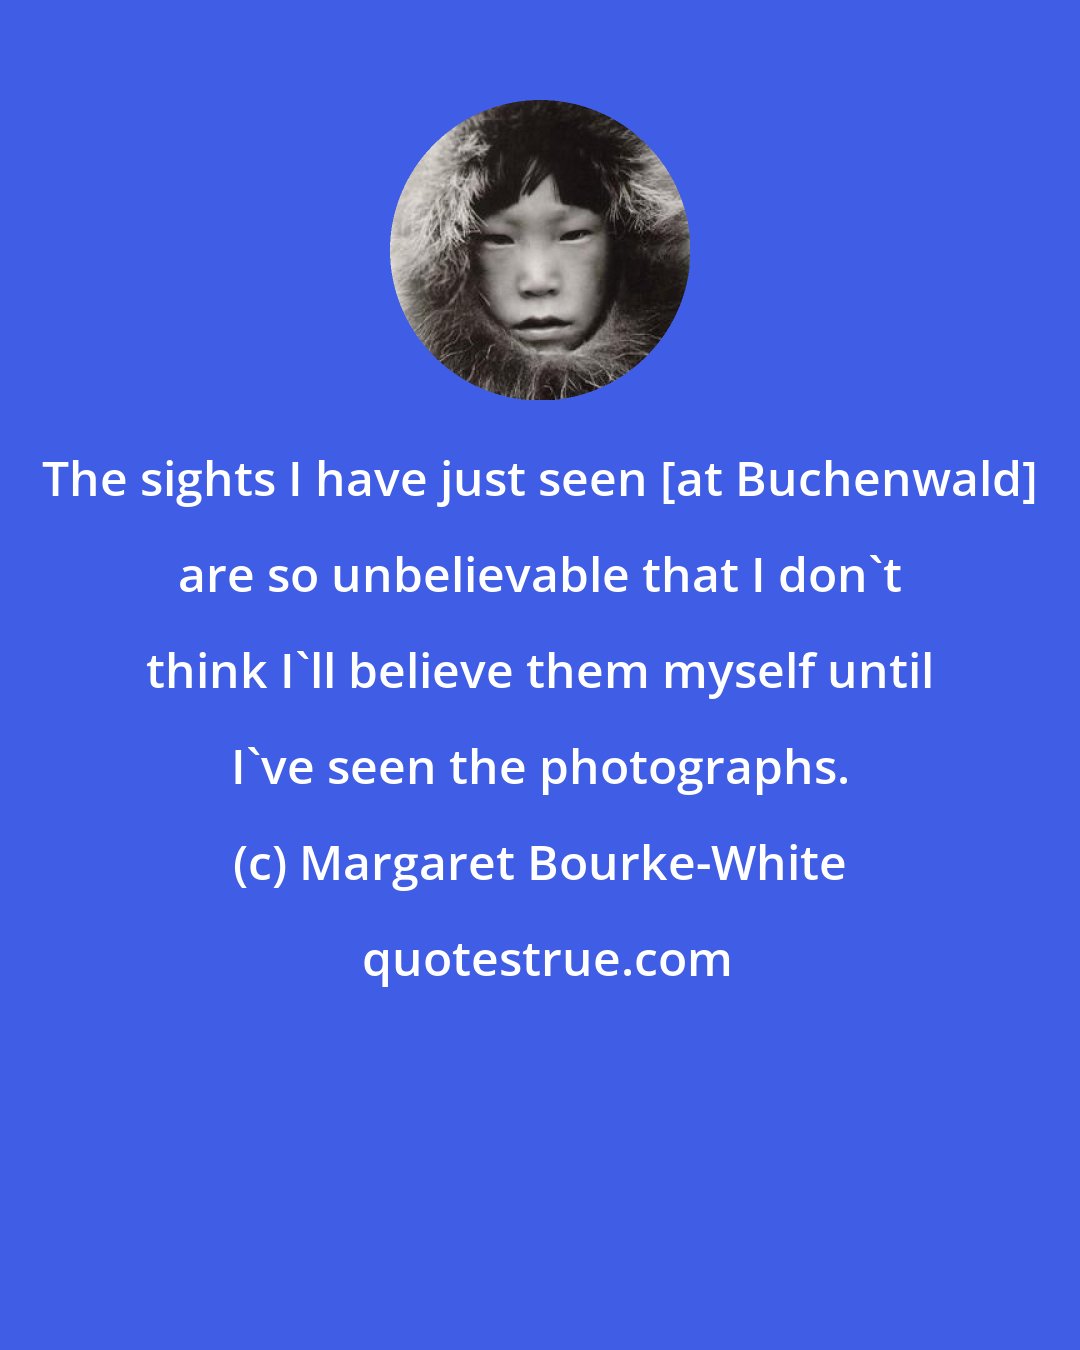 Margaret Bourke-White: The sights I have just seen [at Buchenwald] are so unbelievable that I don't think I'll believe them myself until I've seen the photographs.